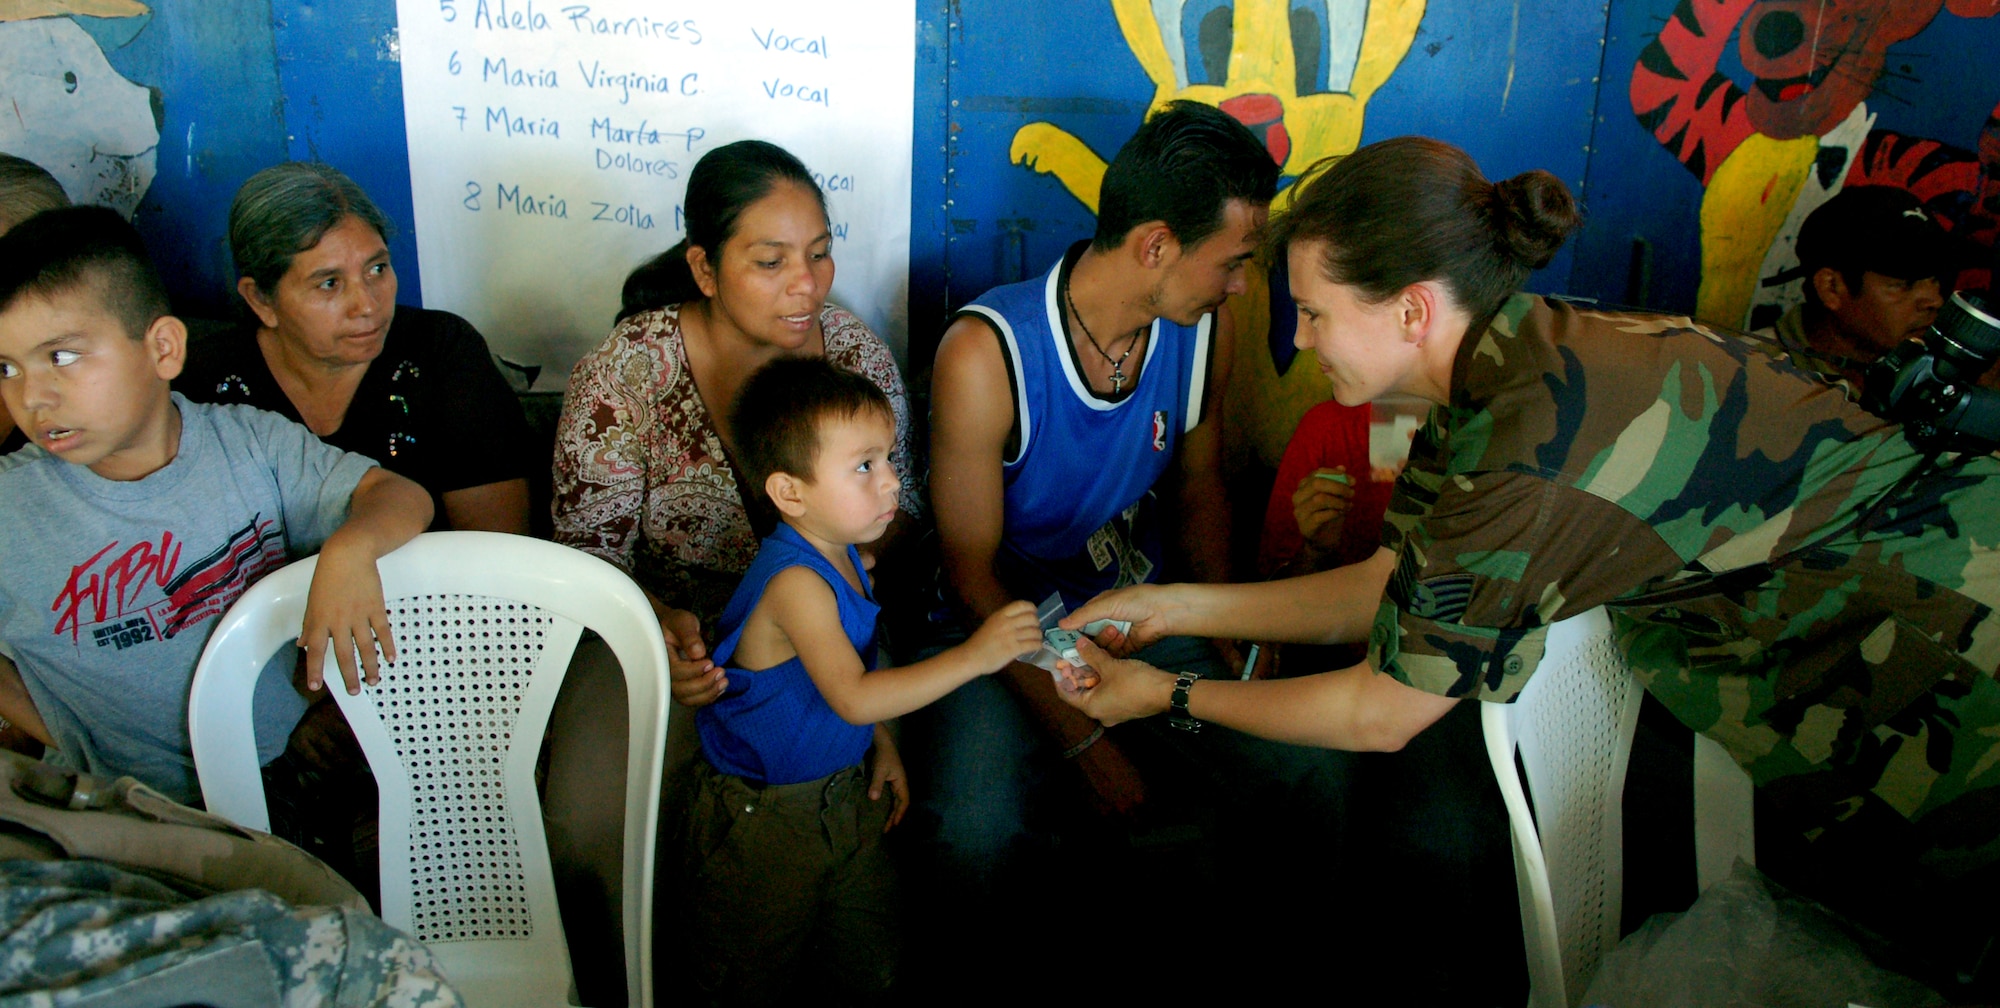 SAN JUAN OPICO, El Salvador – Air Force Tech. Sgt. Angel Roush, Joint Task Force-Bravo Medical Element, hands a bag of vitamins to a young Salvadoran boy at a makeshift clinic where doctors, nurses and medics from the United States and Salvadoran militaries conducted a Medical Readiness Training Exercise Sept. 27.  (U.S. Air Force photo by Staff Sgt. Austin M. May)